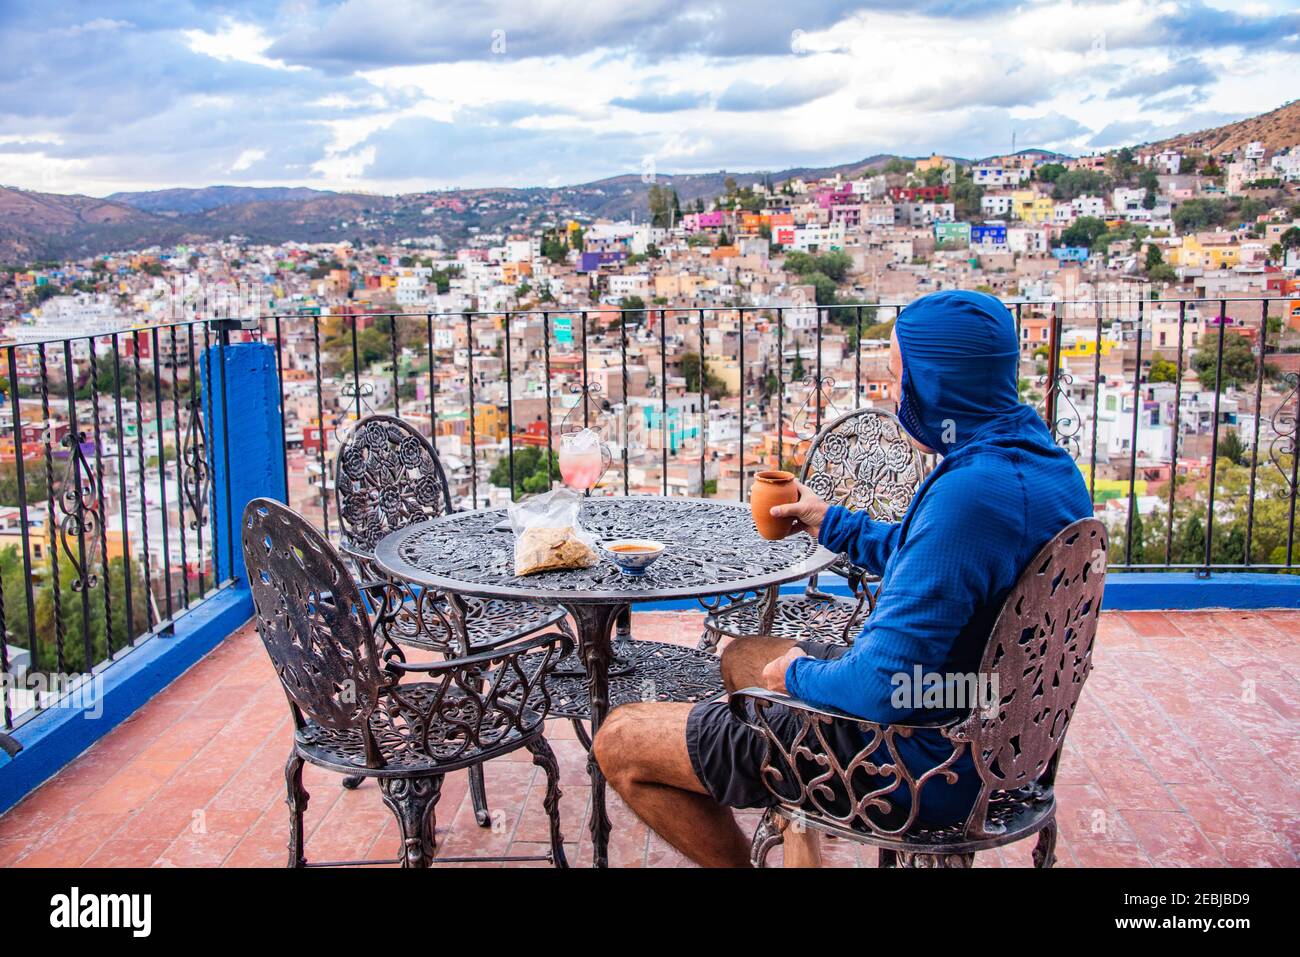 Drinking a glass of margarita with the view of the UNESCO World Heritage Centro Historico in Guanajuato, Mexico Stock Photo